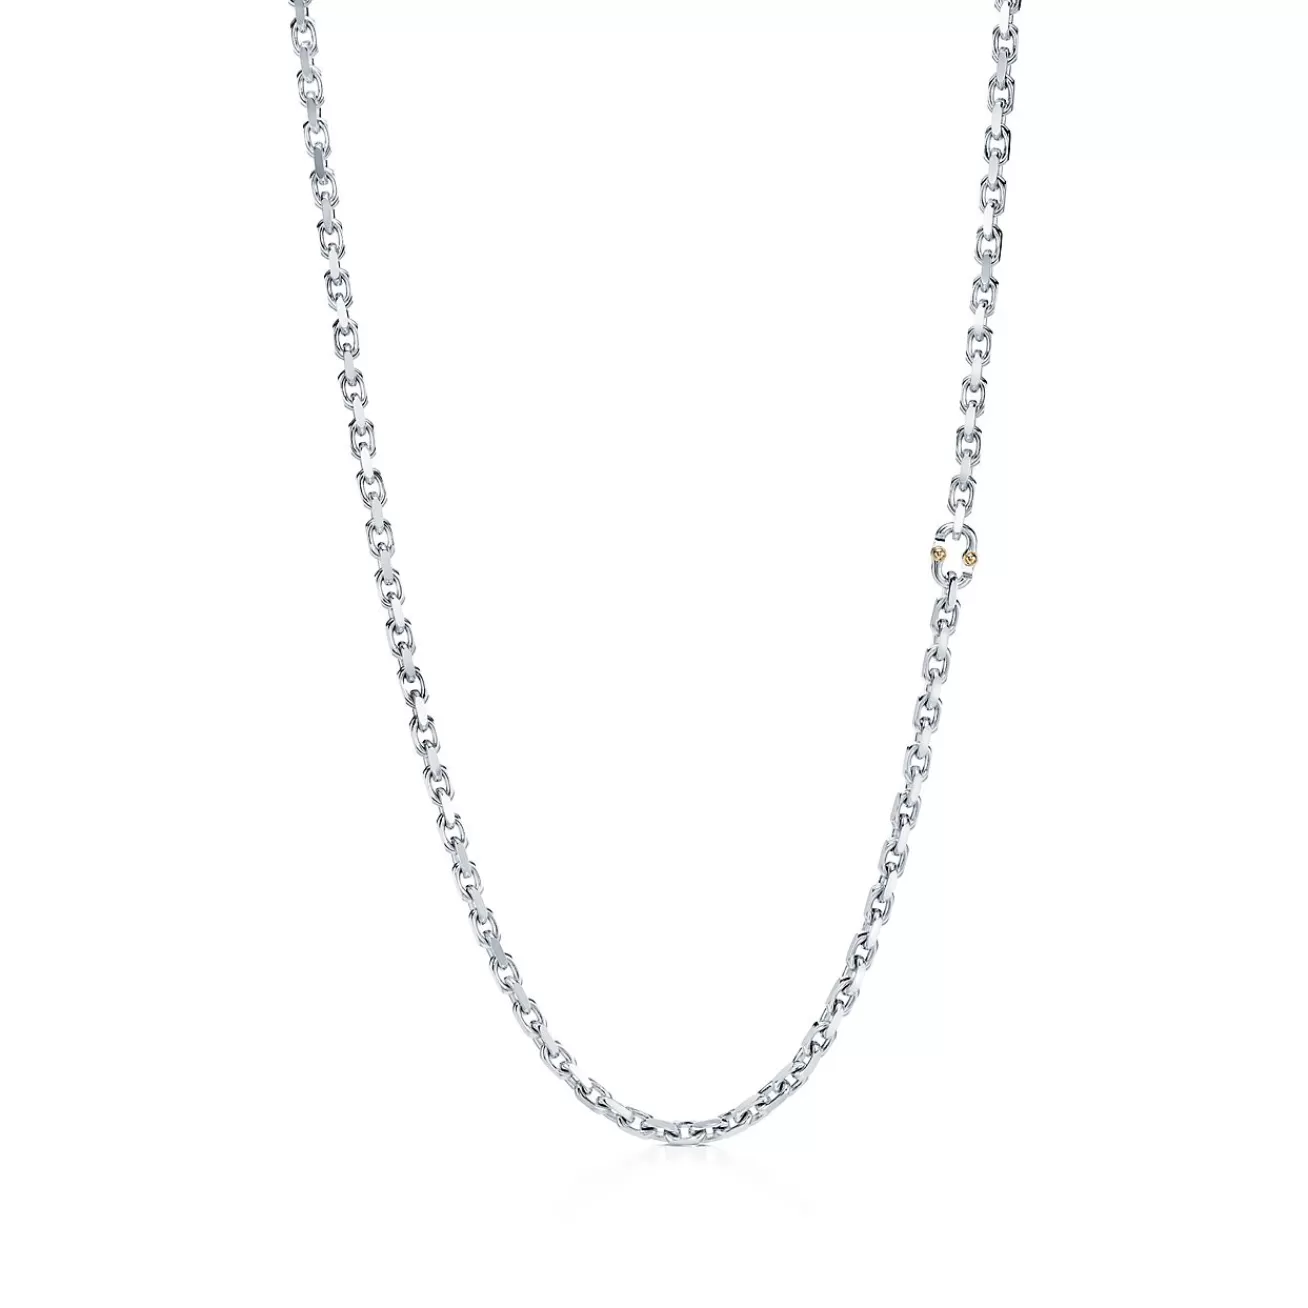 Tiffany & Co. Tiffany 1837® Makers chain necklace in sterling silver and 18k gold, 24". | ^ Necklaces & Pendants | Men's Jewelry